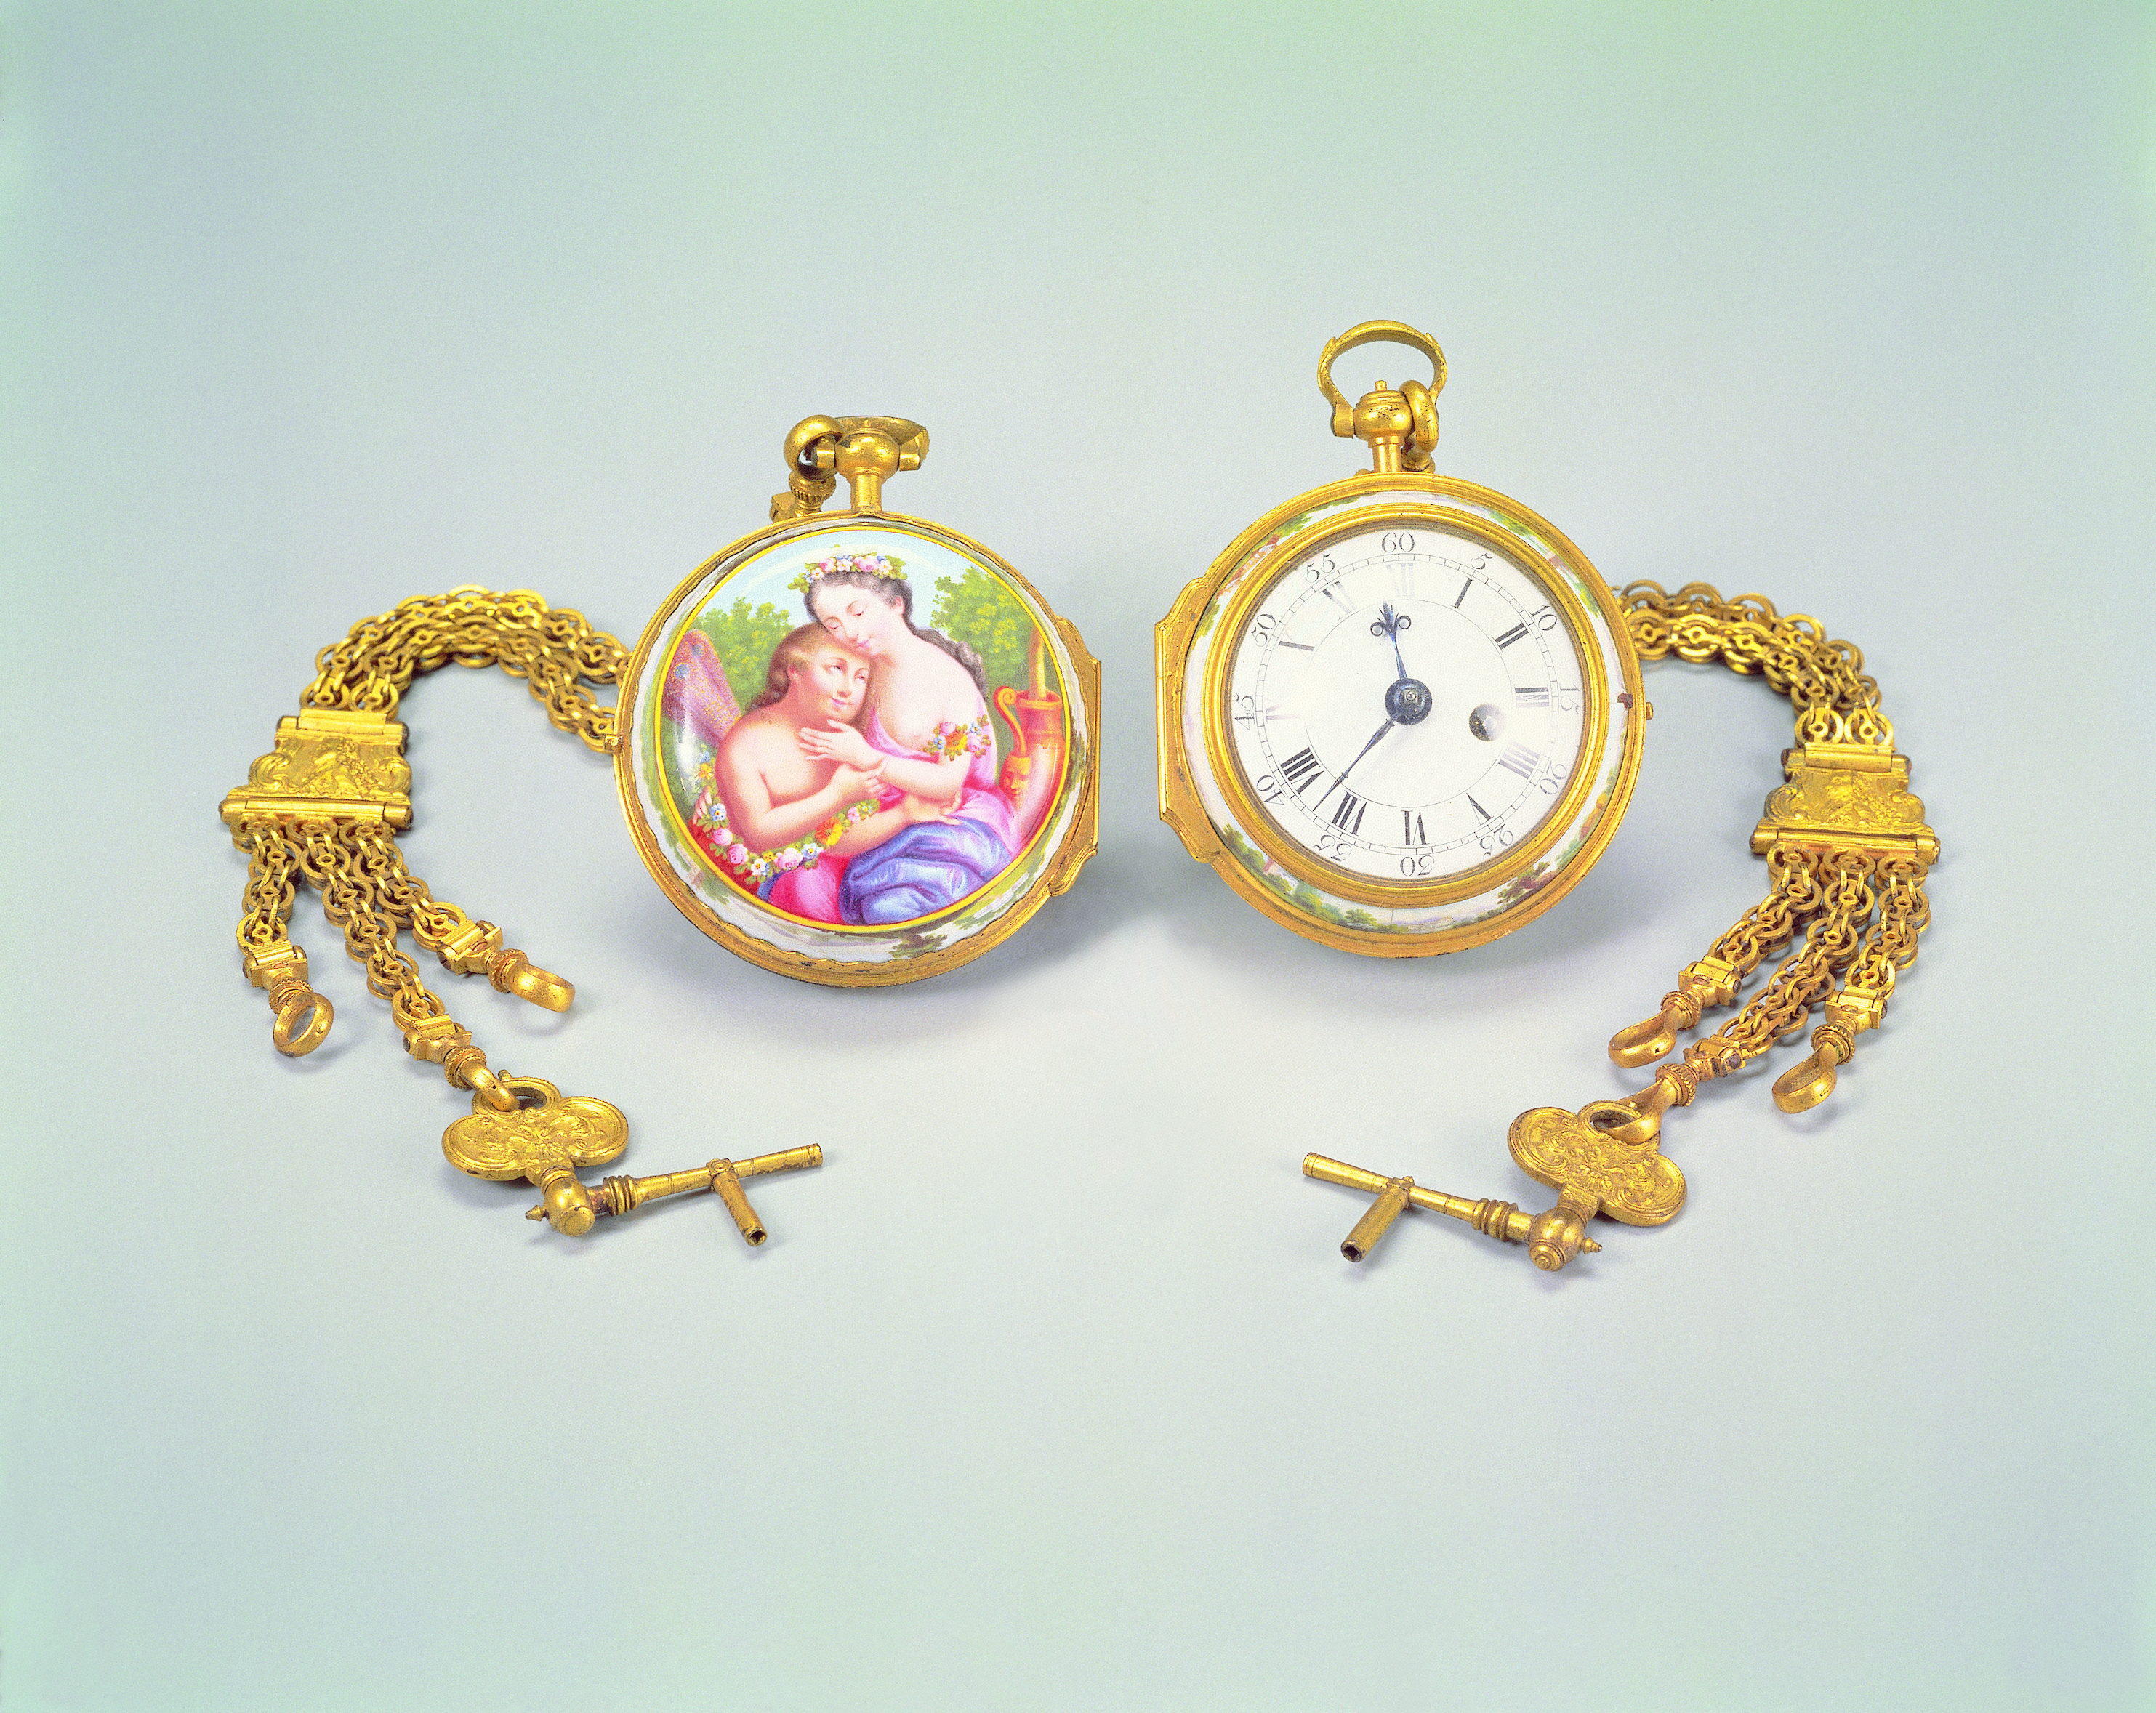 Two Gilt Gold Pocket Watches with Painted Enamelware